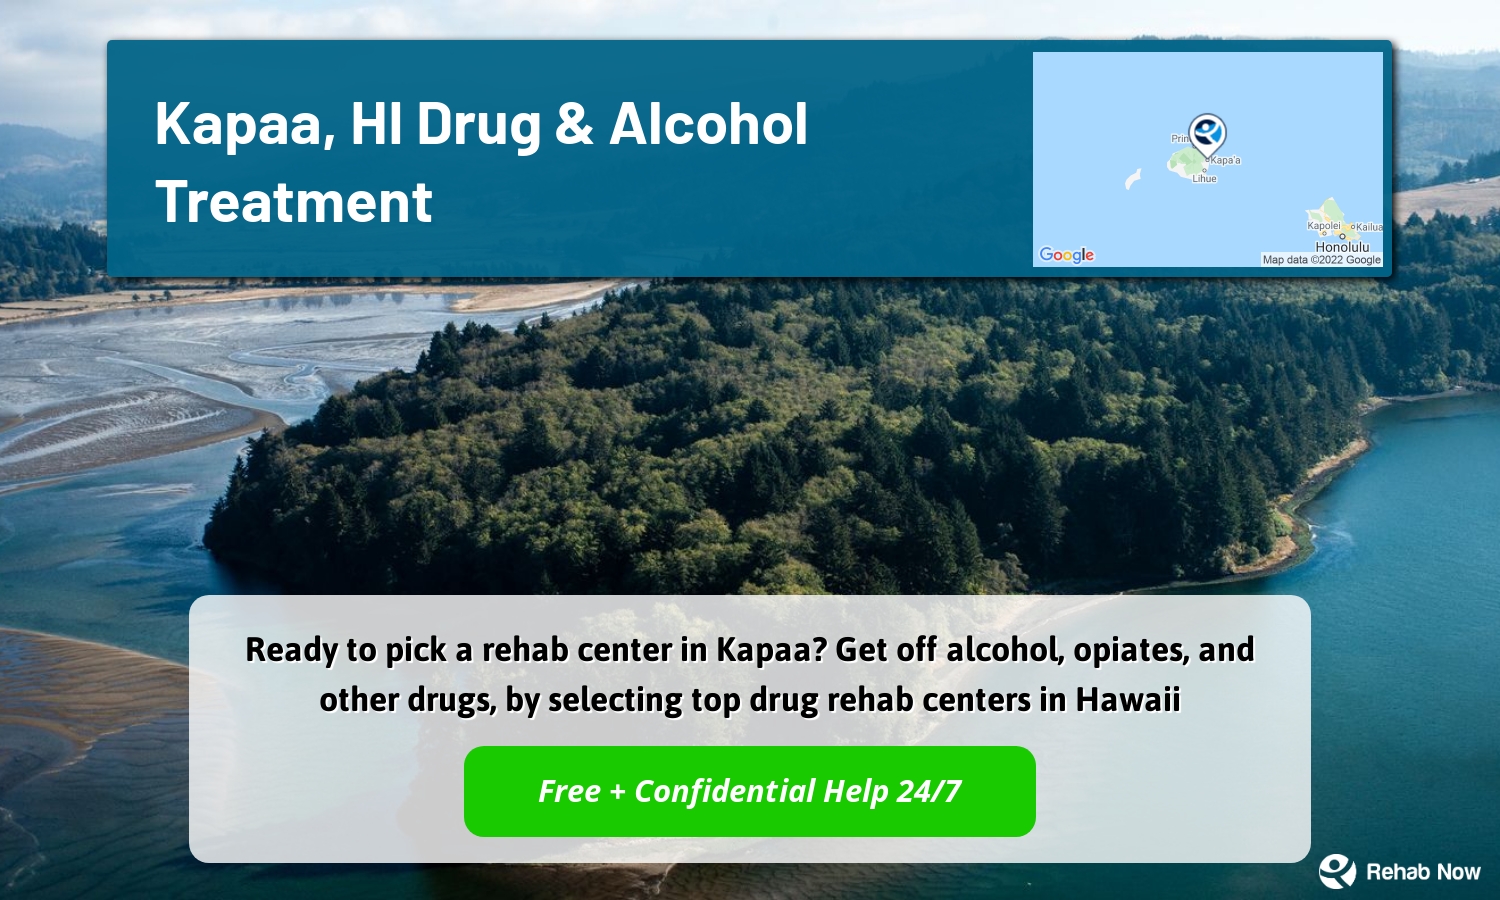 Ready to pick a rehab center in Kapaa? Get off alcohol, opiates, and other drugs, by selecting top drug rehab centers in Hawaii